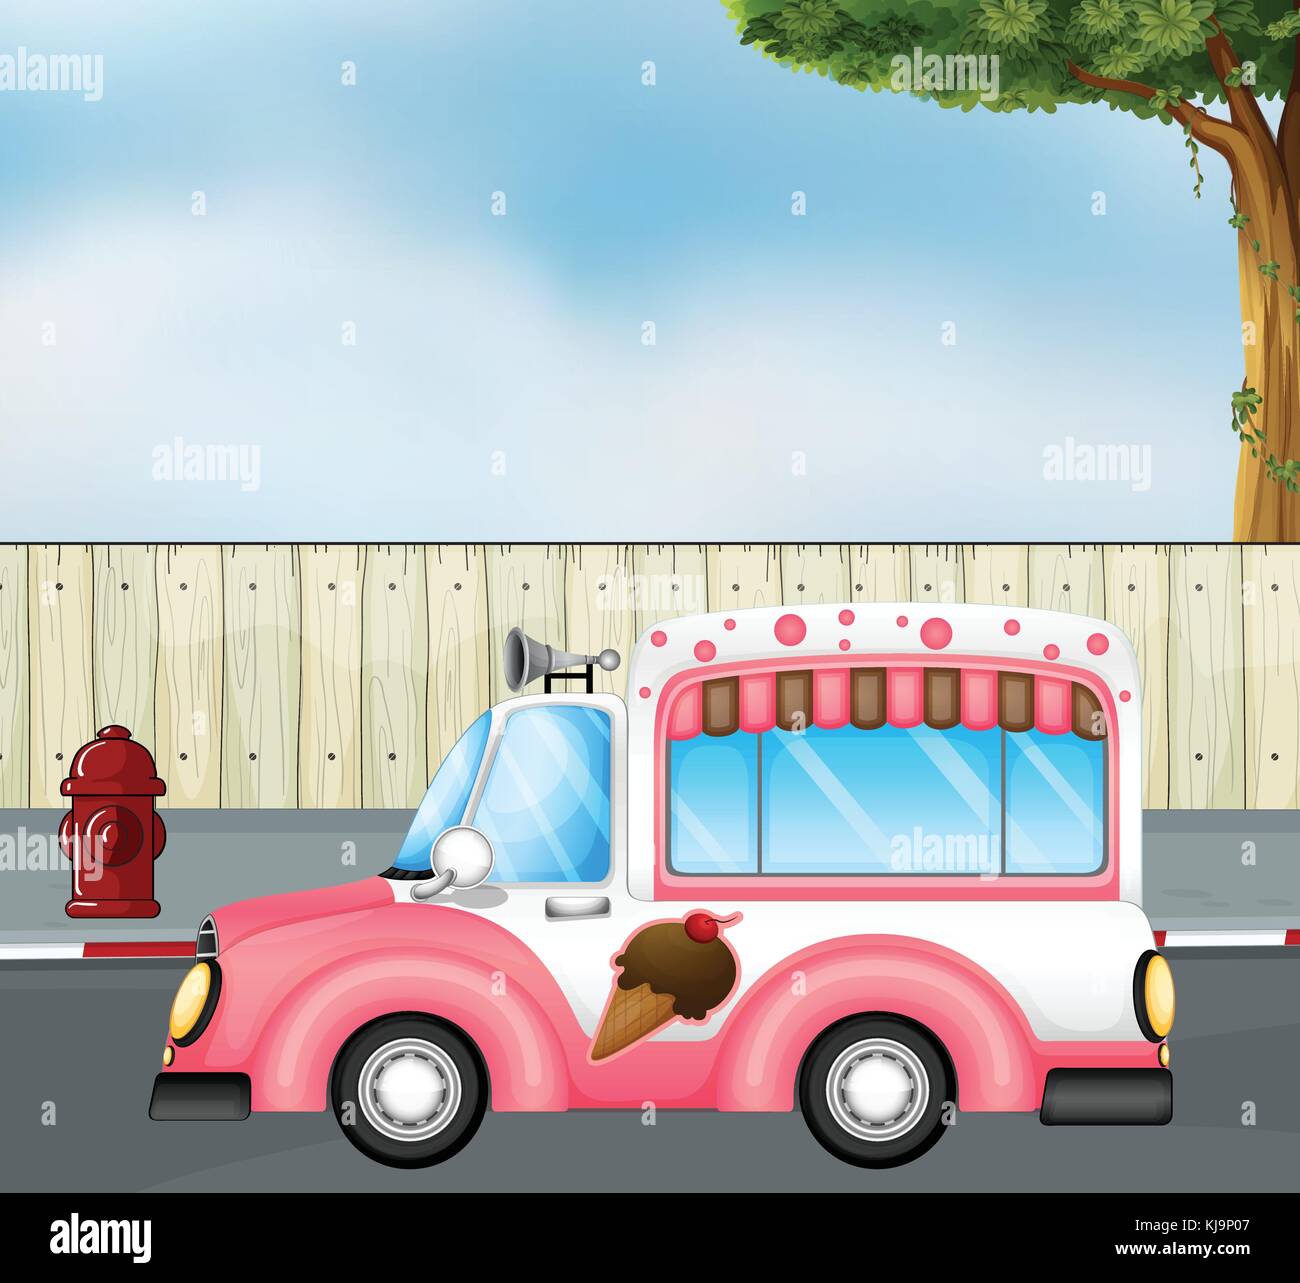 Illustration of a pink ice cream bus at the road Stock Vector